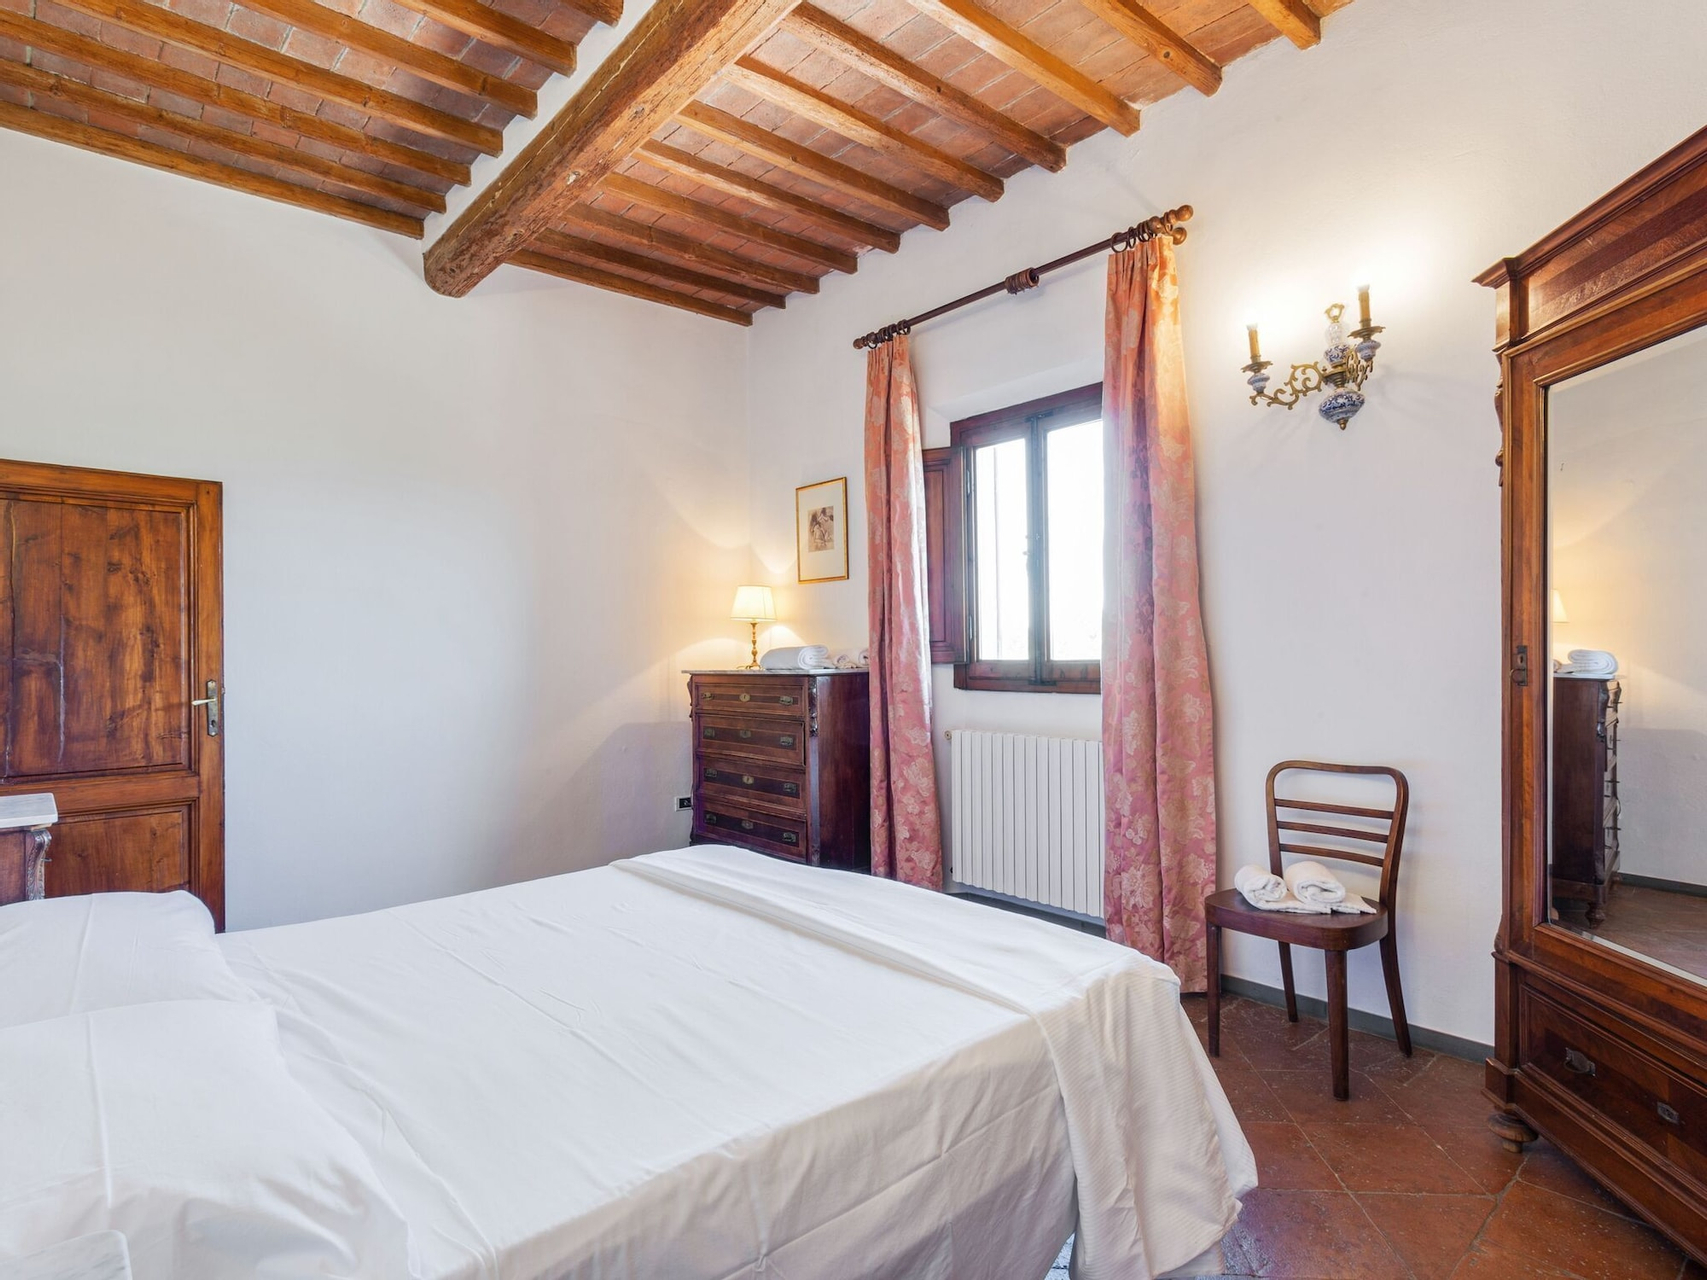 Bedroom 3, Spacious Villa in Empoli with Swimming Pool, Florence